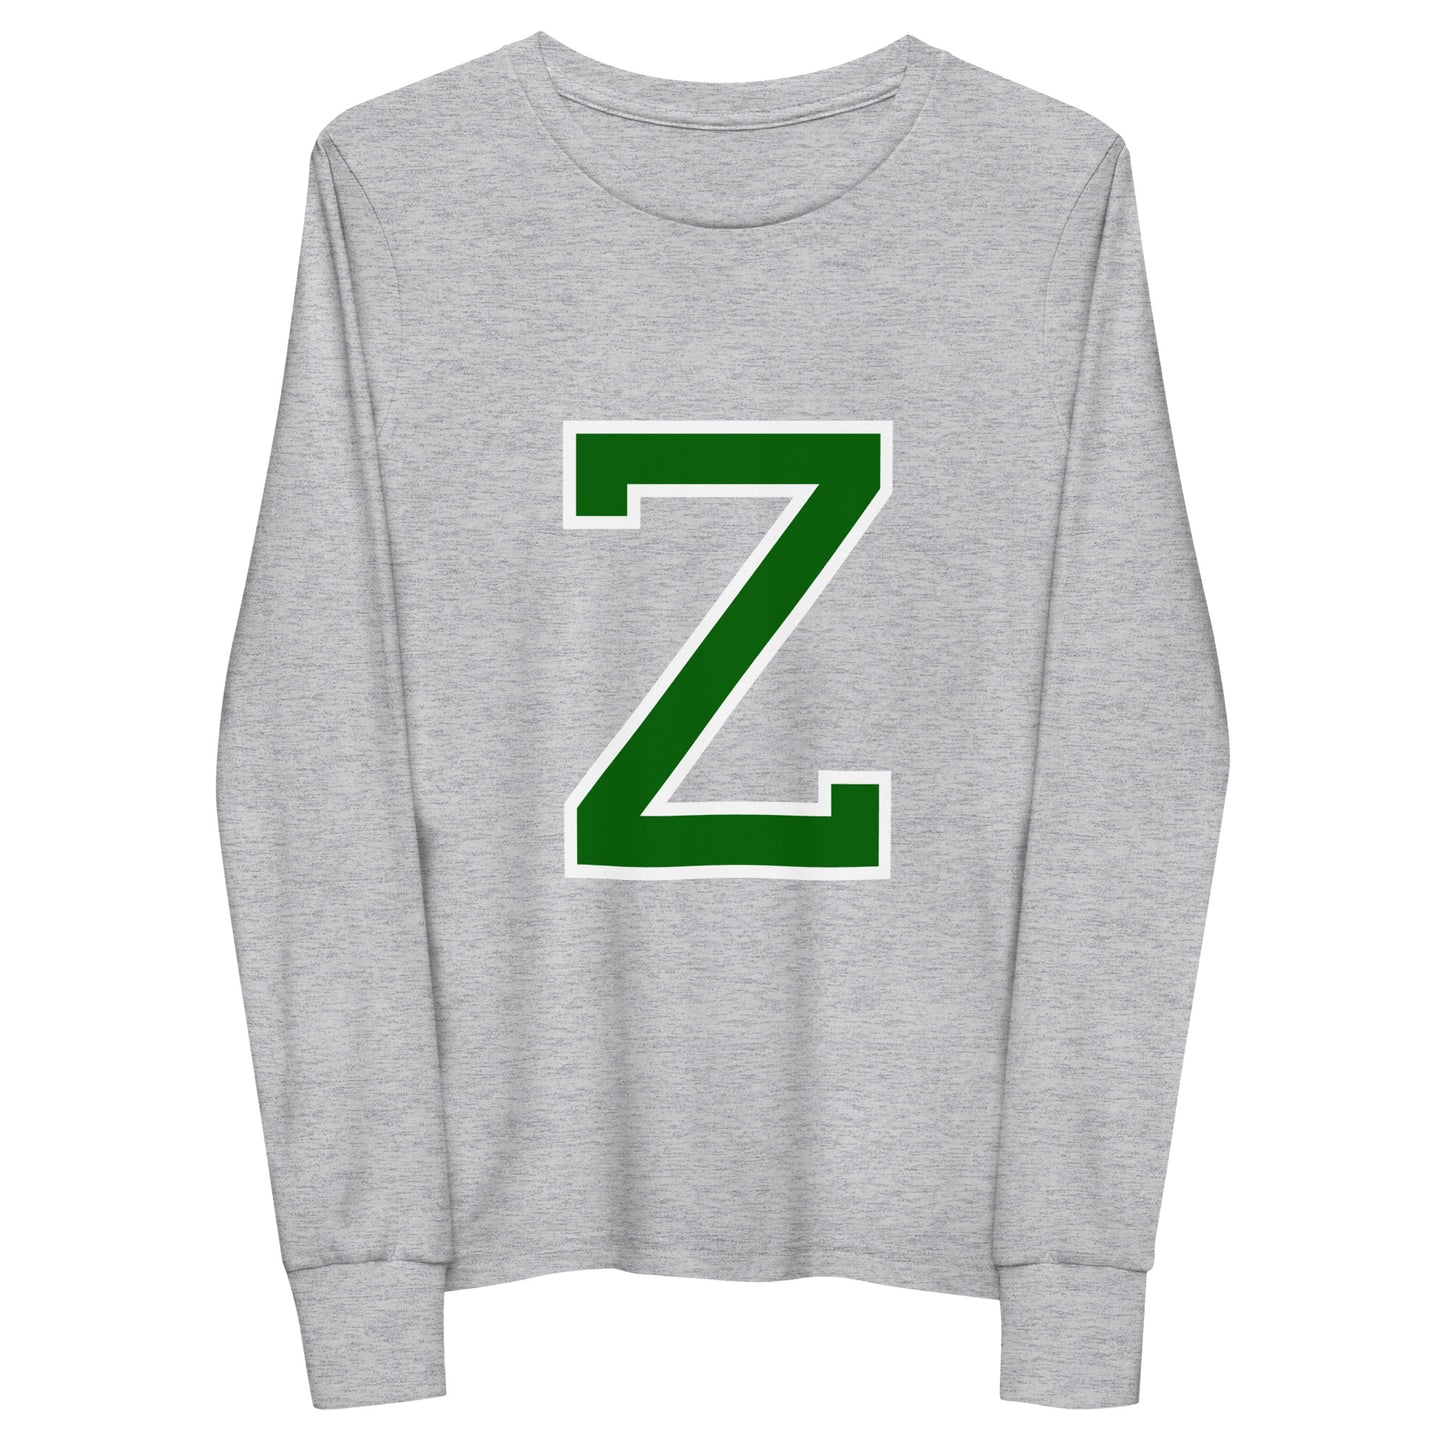 Z -  Sustainably Made Kids Long Sleeve T-shirt